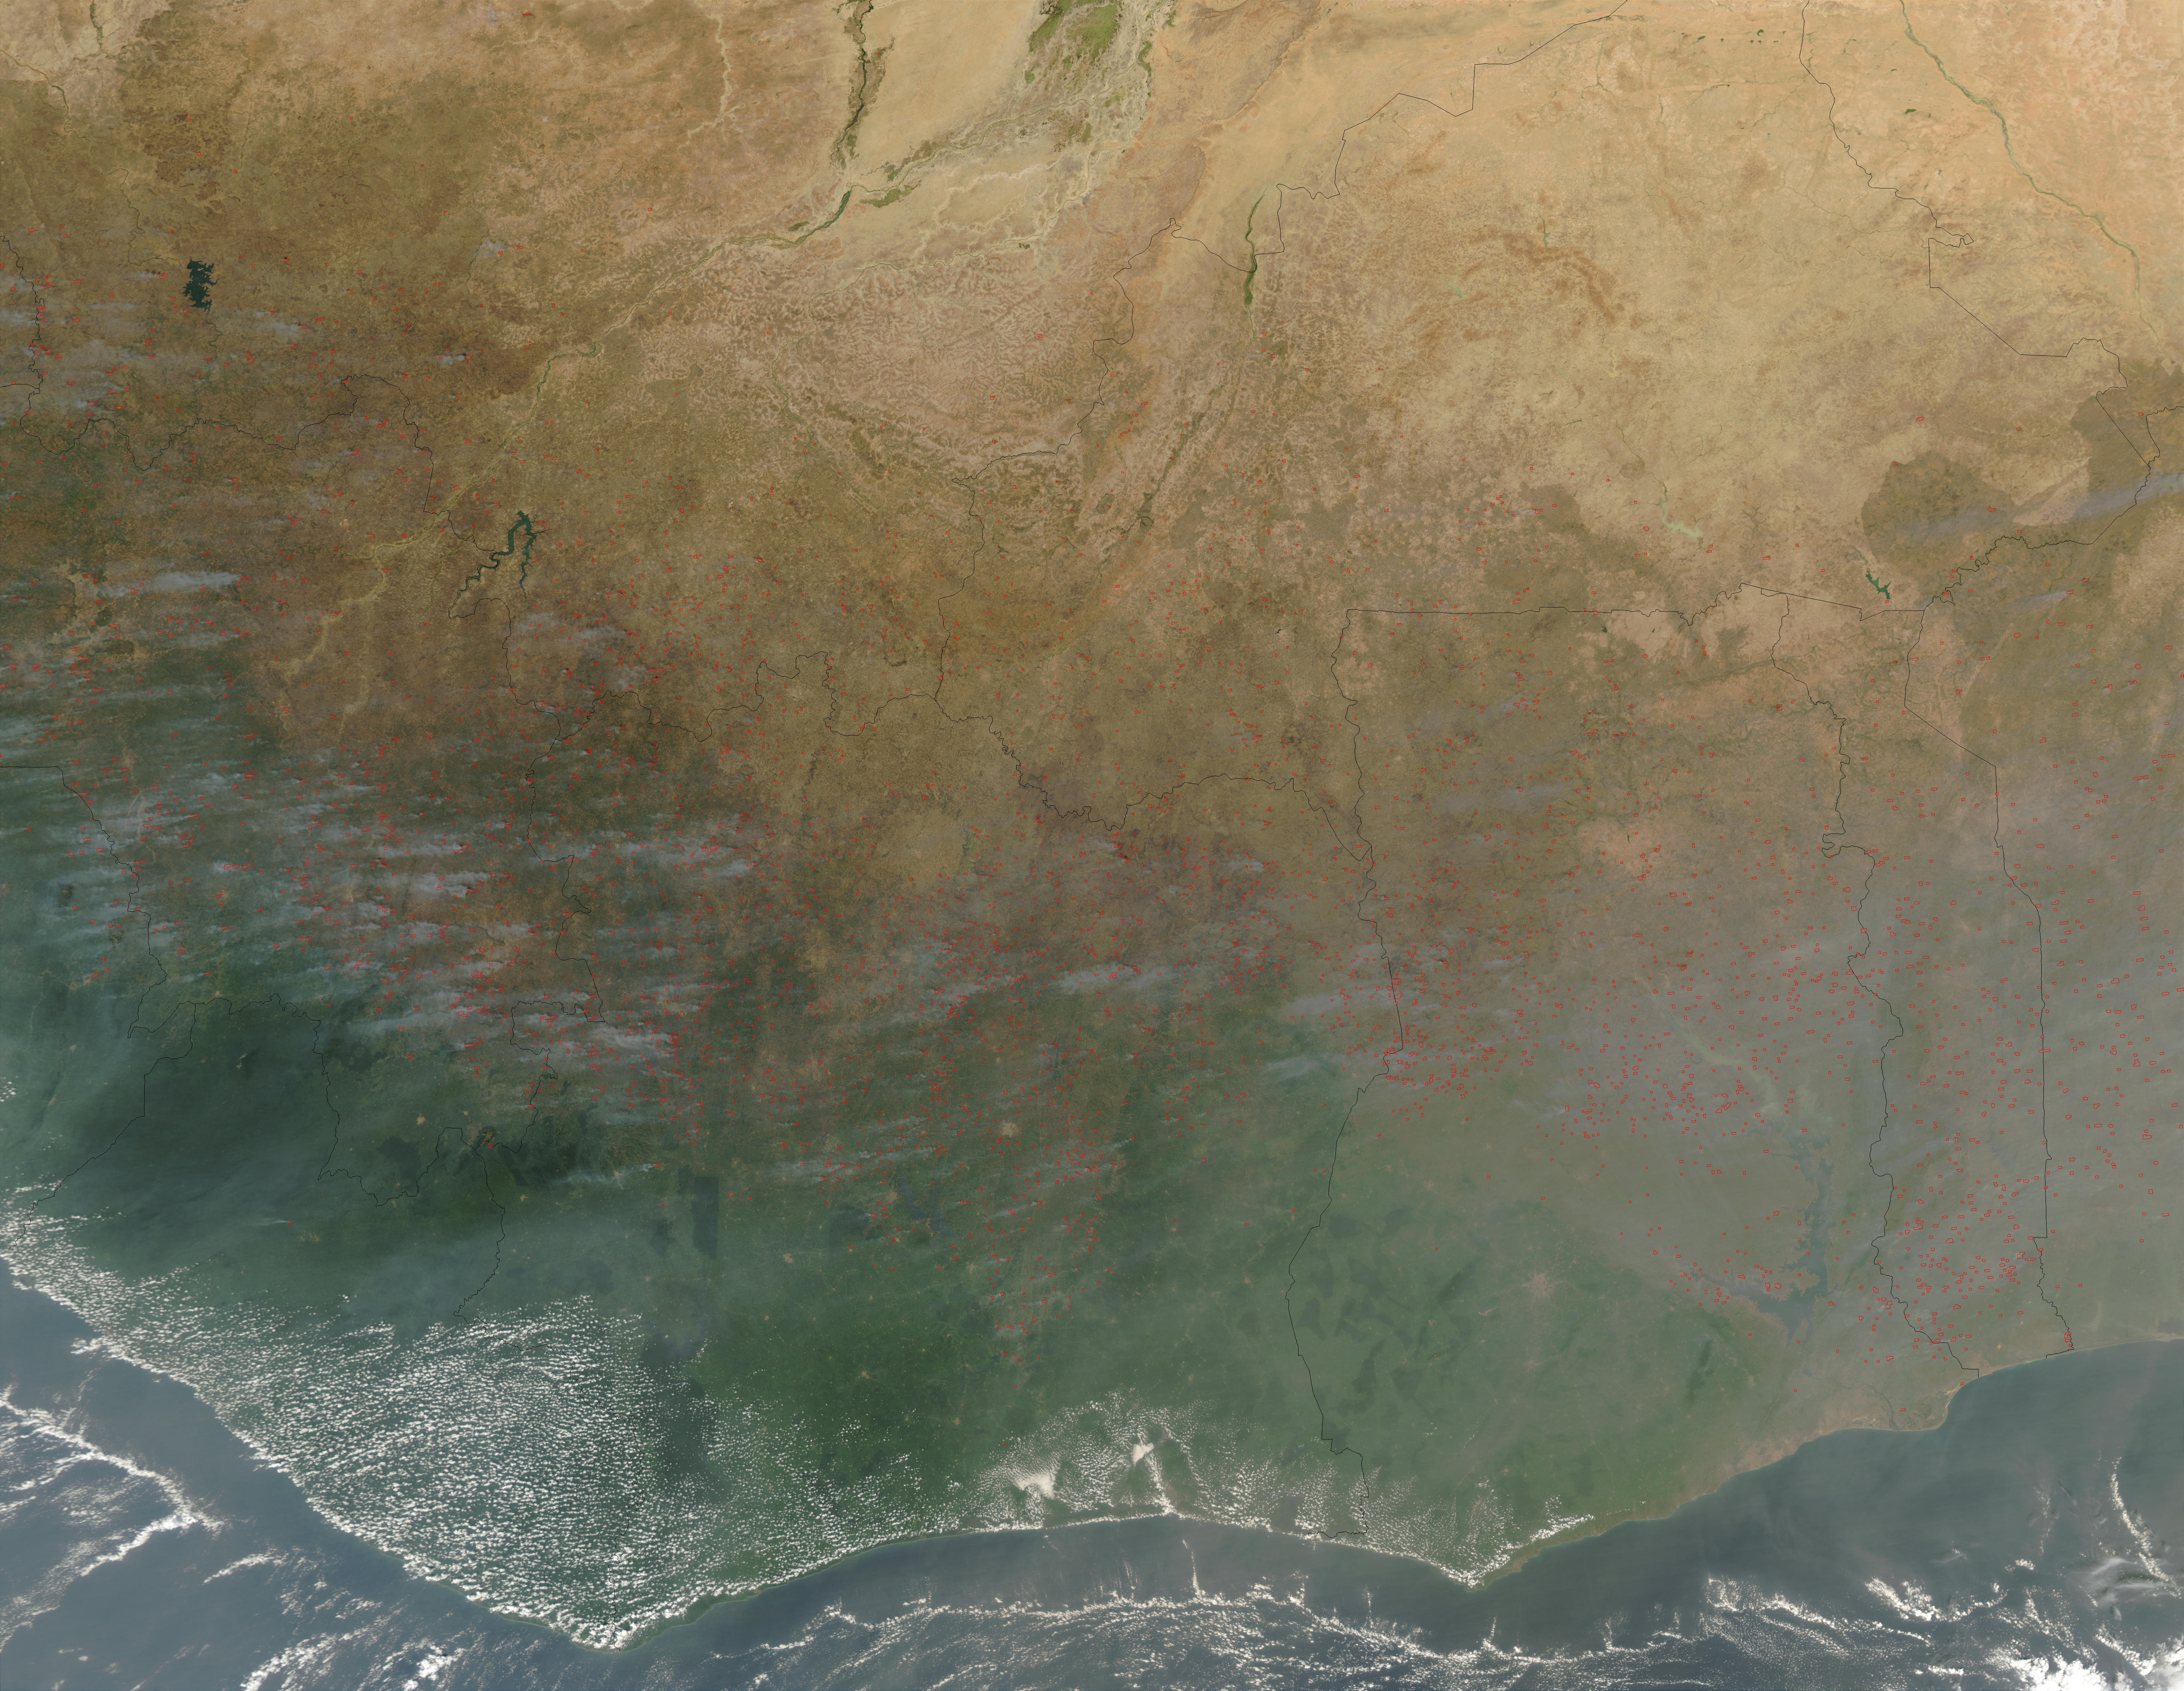 Widely Scattered Fires across Central Africa - related image preview